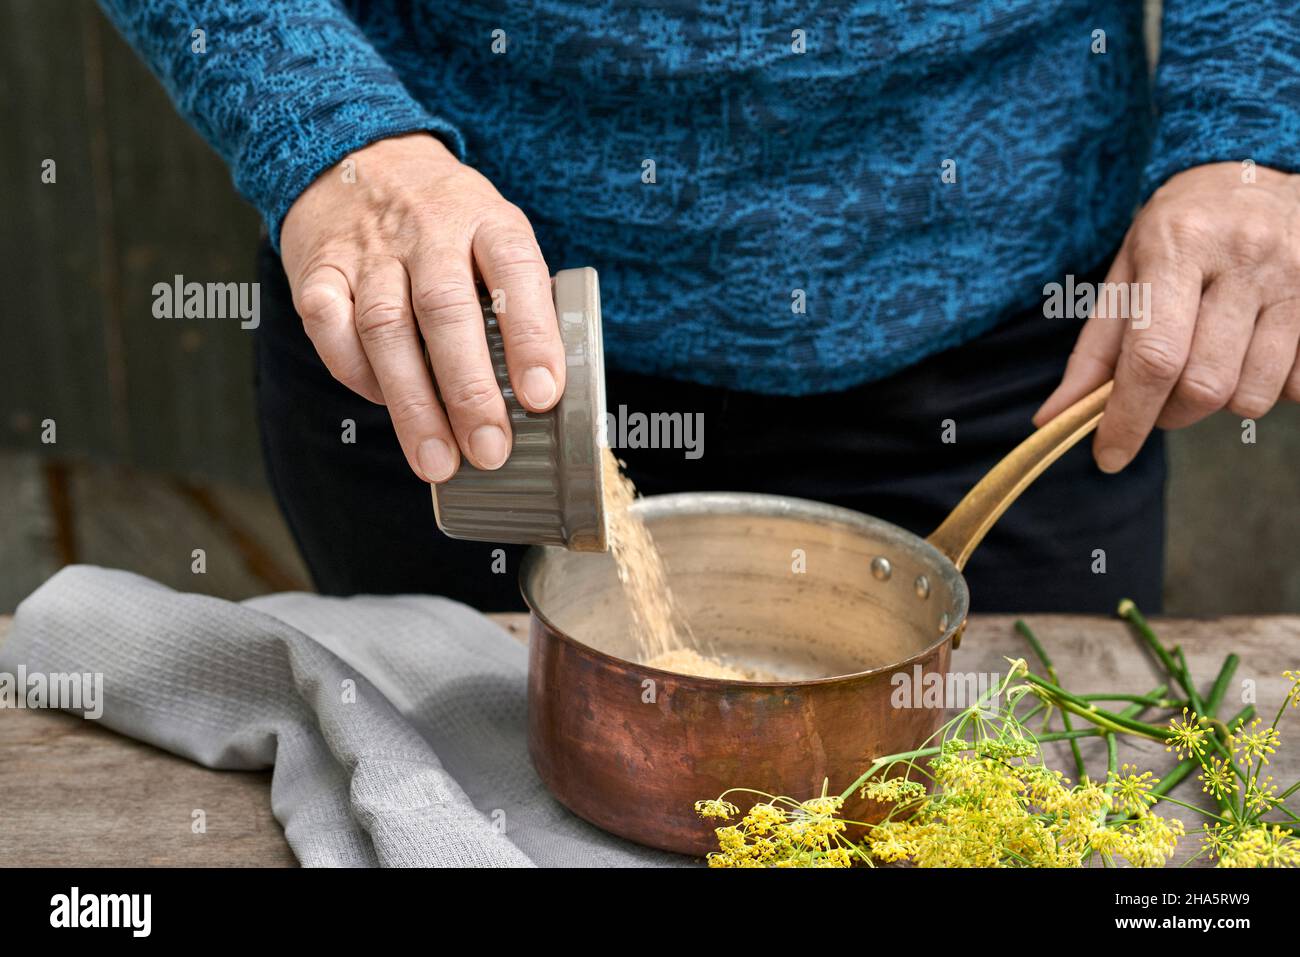 working steps with fennel and fennel seeds for the preparation of fennel syrup,woman fills cane sugar into a copper saucepan Stock Photo